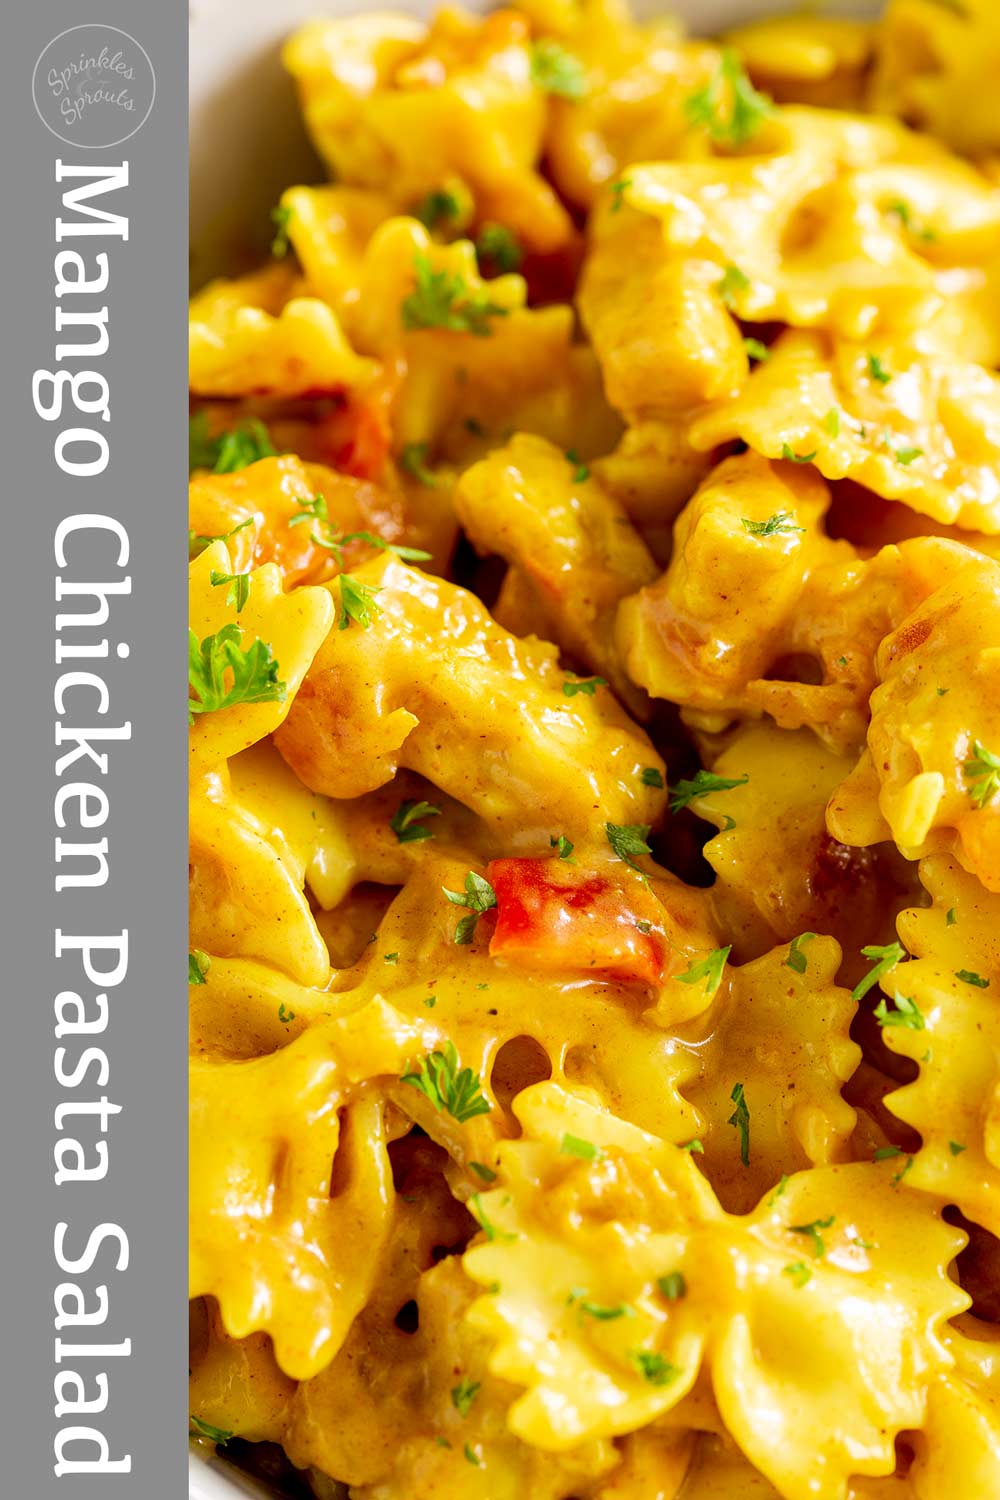 Pin image - Mango chicken pasta salad with text overlay